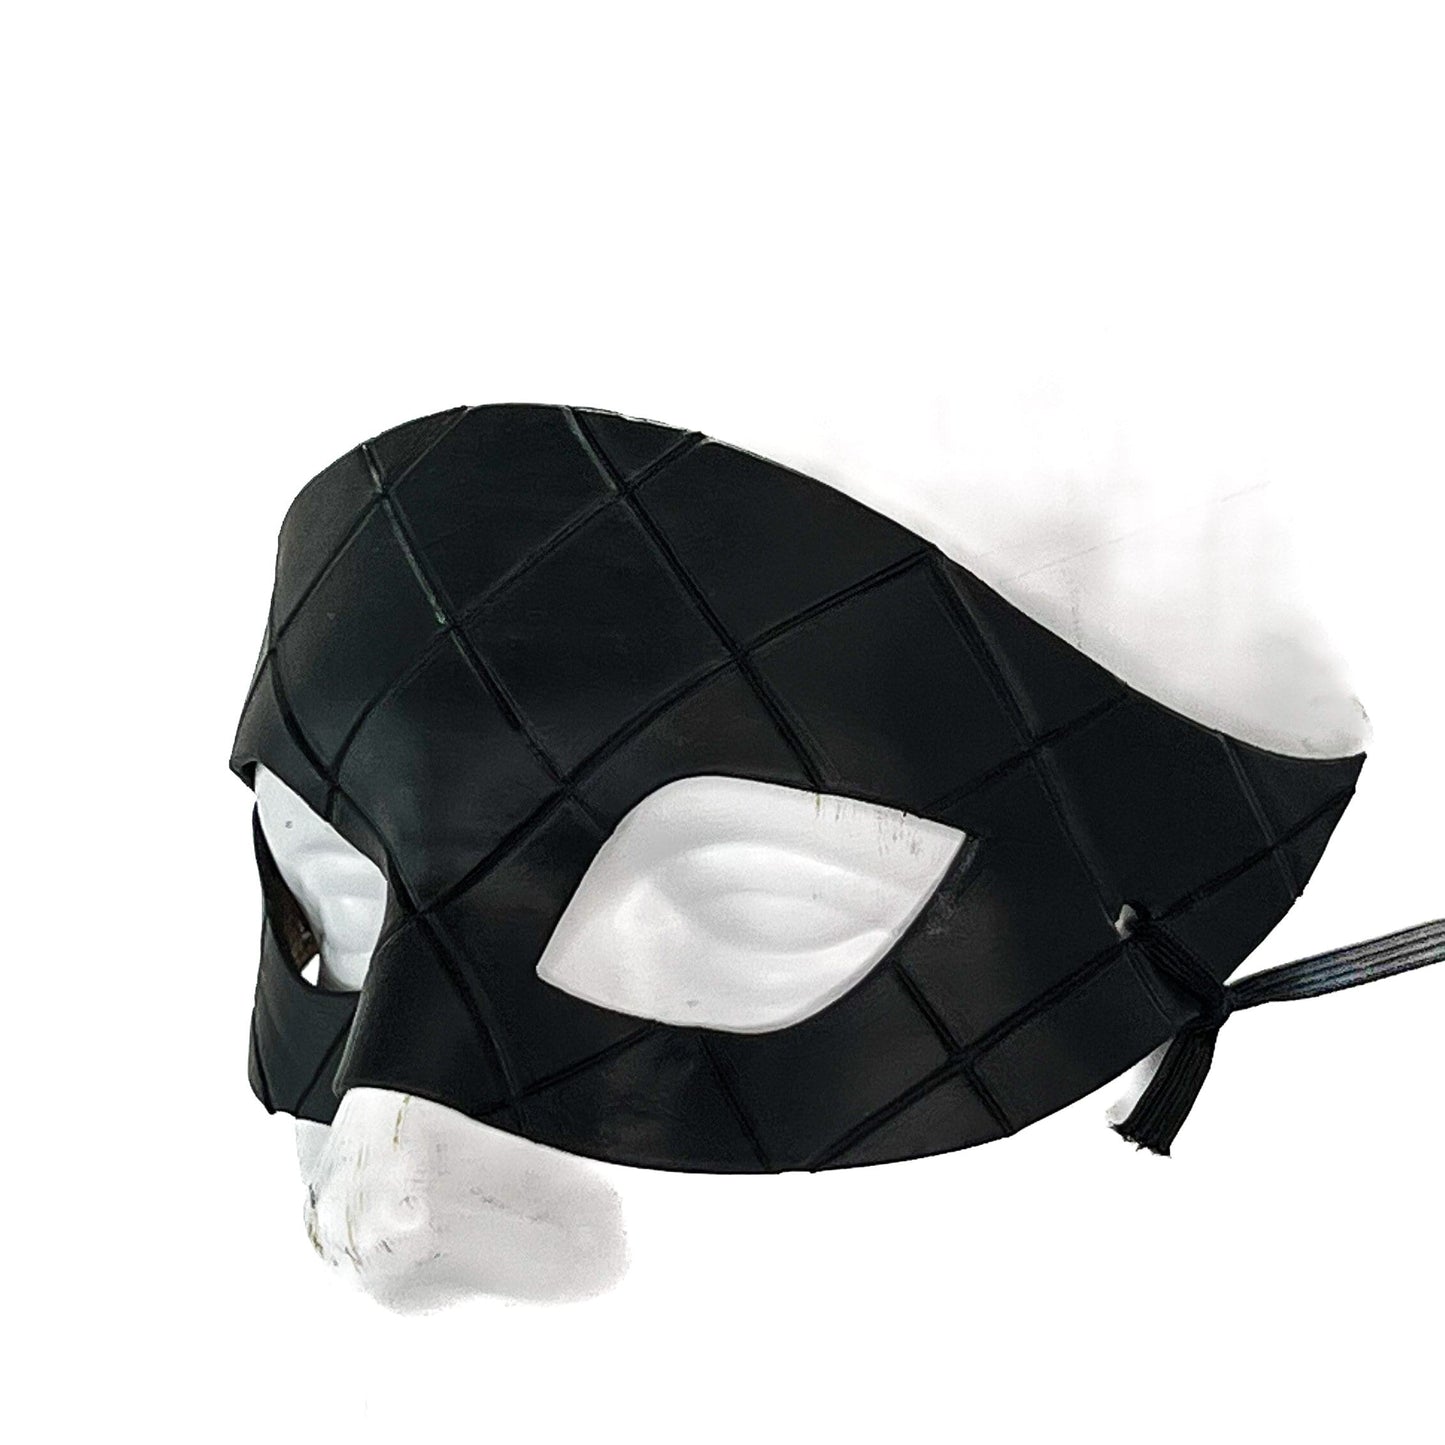 Masquerade Handmade Genuine Leather Mask in Black for Masquerades Halloween or Cosplay